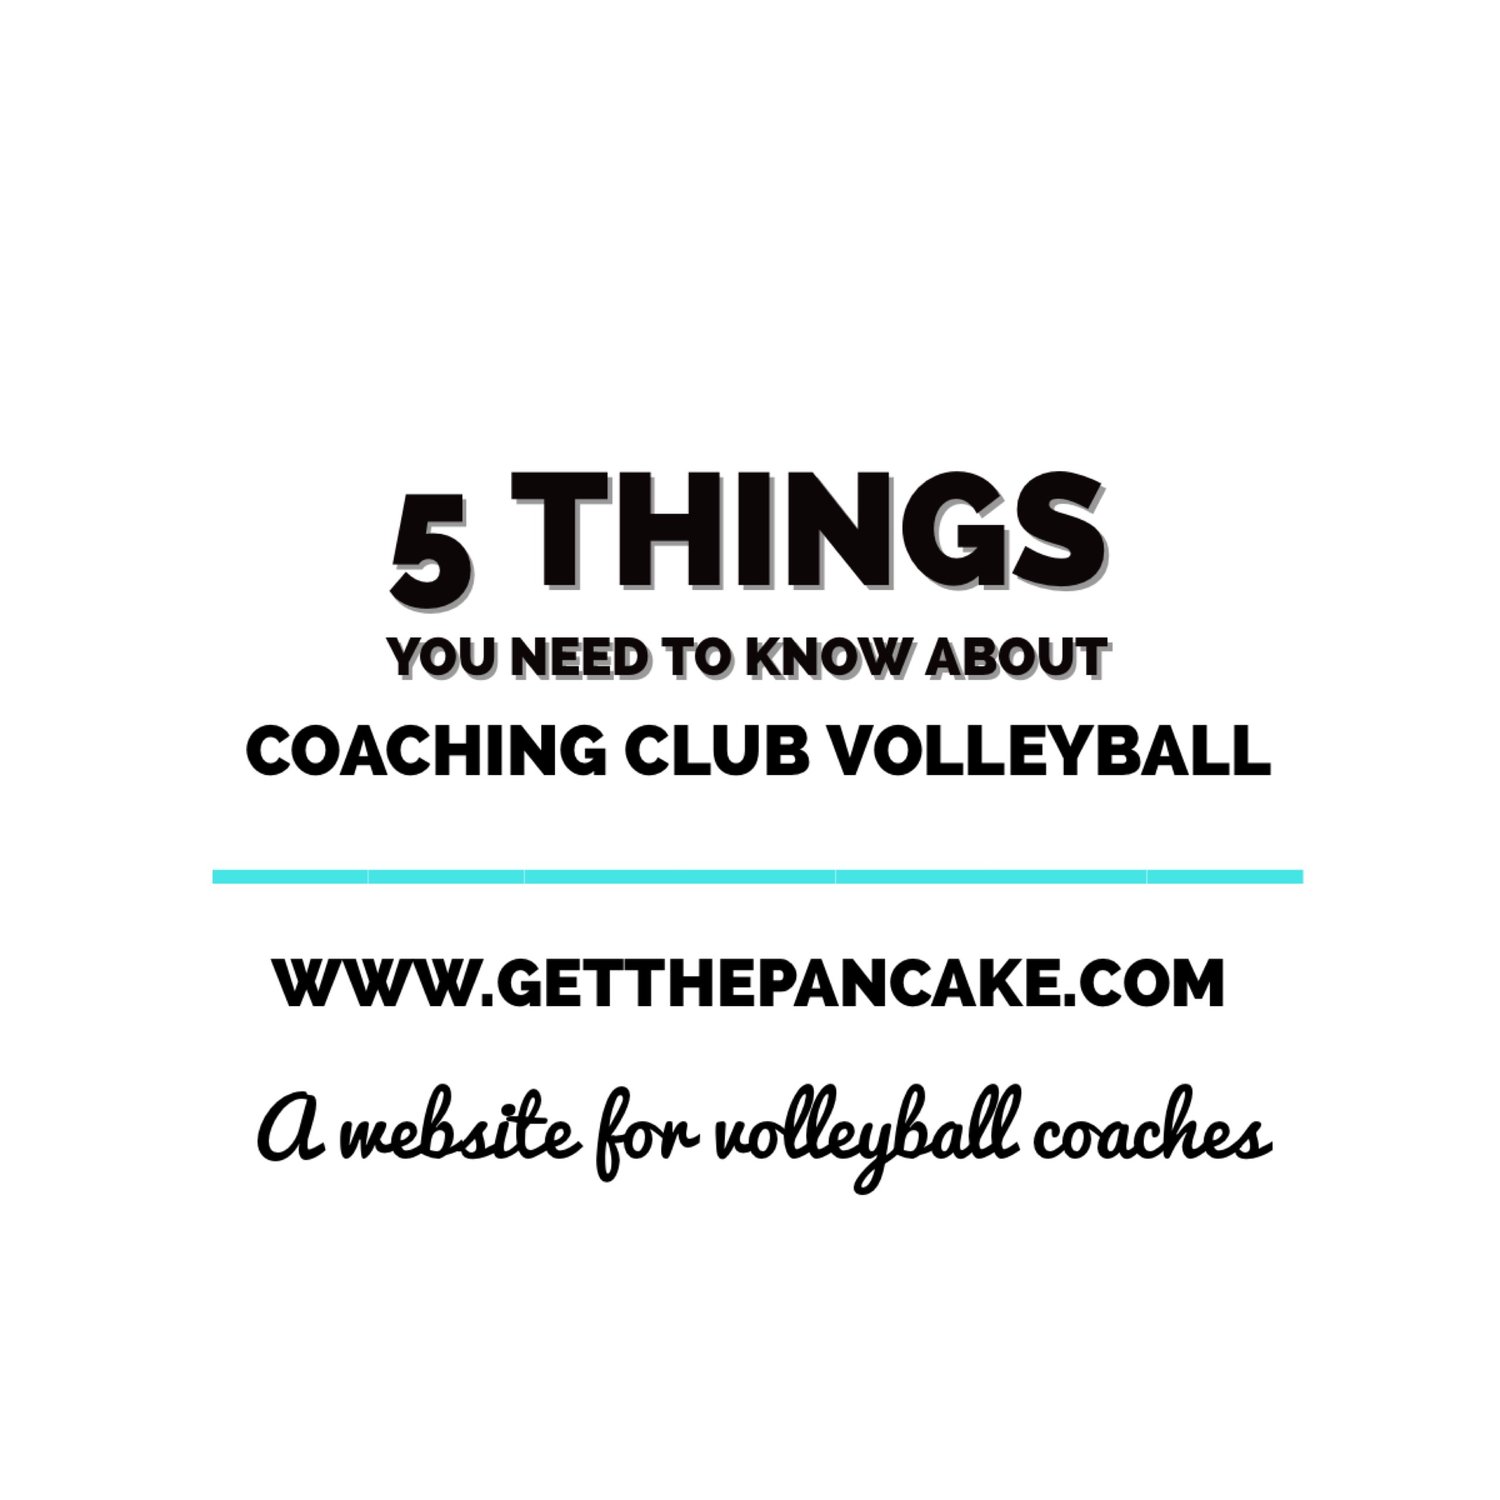 5 Things You Need to Know About Coaching Club Volleyball